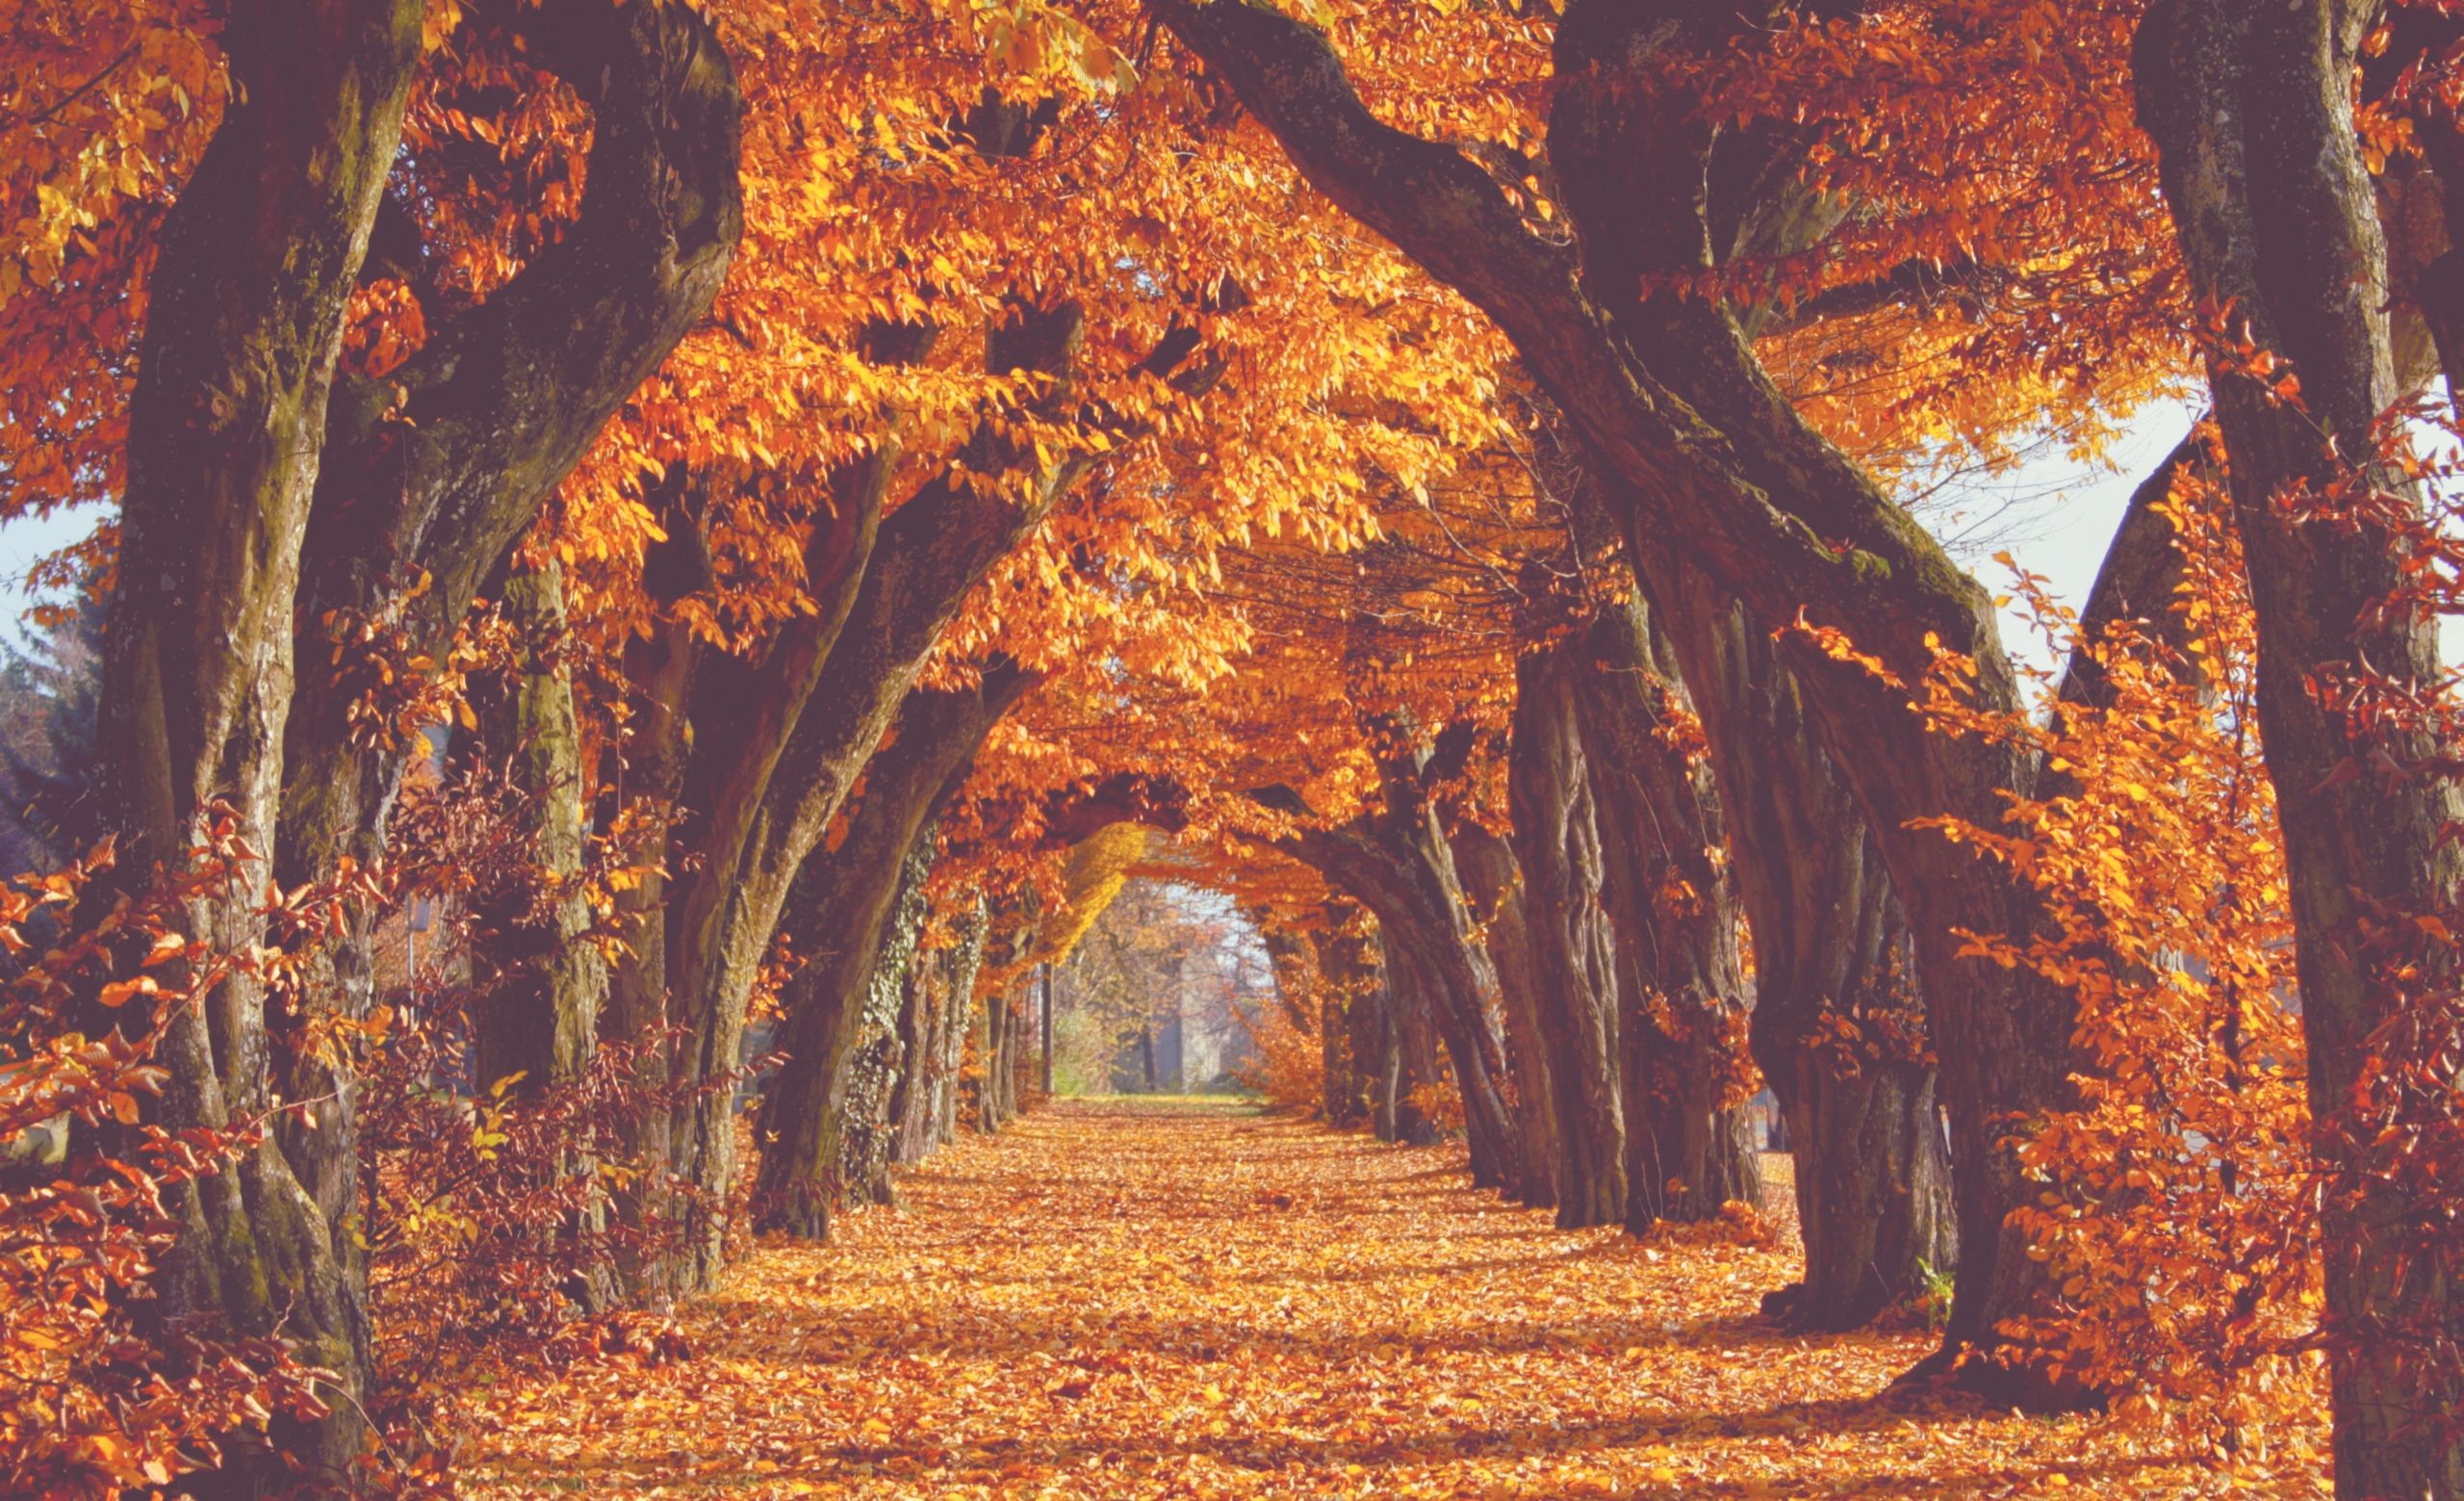 My Image / Photohoot / Music Video (Kerry Page). Autumn scenery, Autumn wallpaper hd, Fall picture